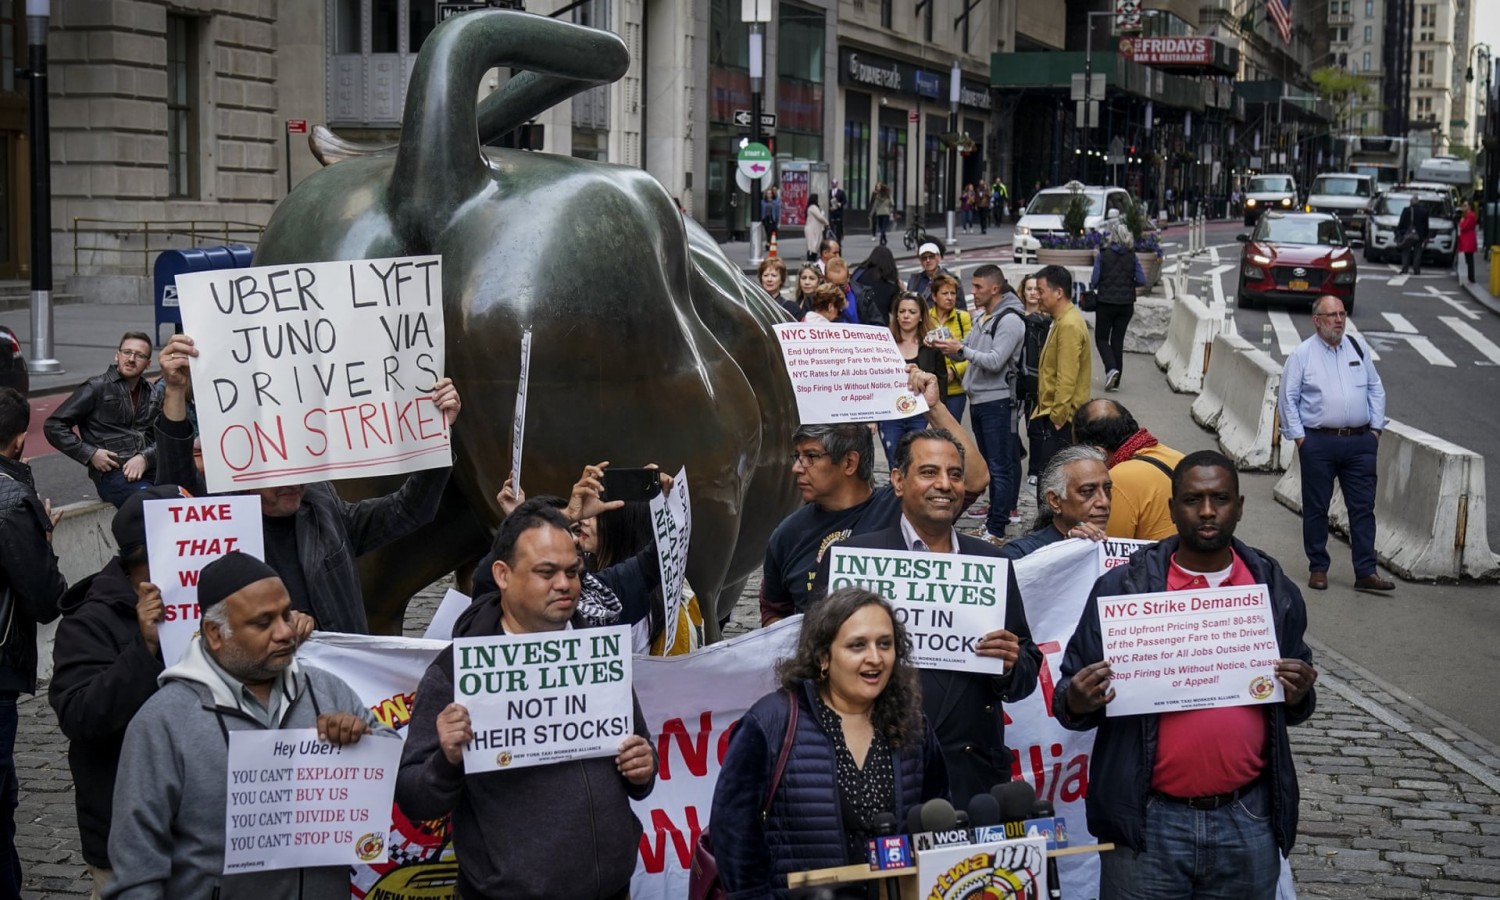 A small group of independent drivers and supporters protest against Uber and other app-based ride-hailing companies near the Wall Street charging bull on Wednesday. Photograph: Drew Angerer/Getty Images